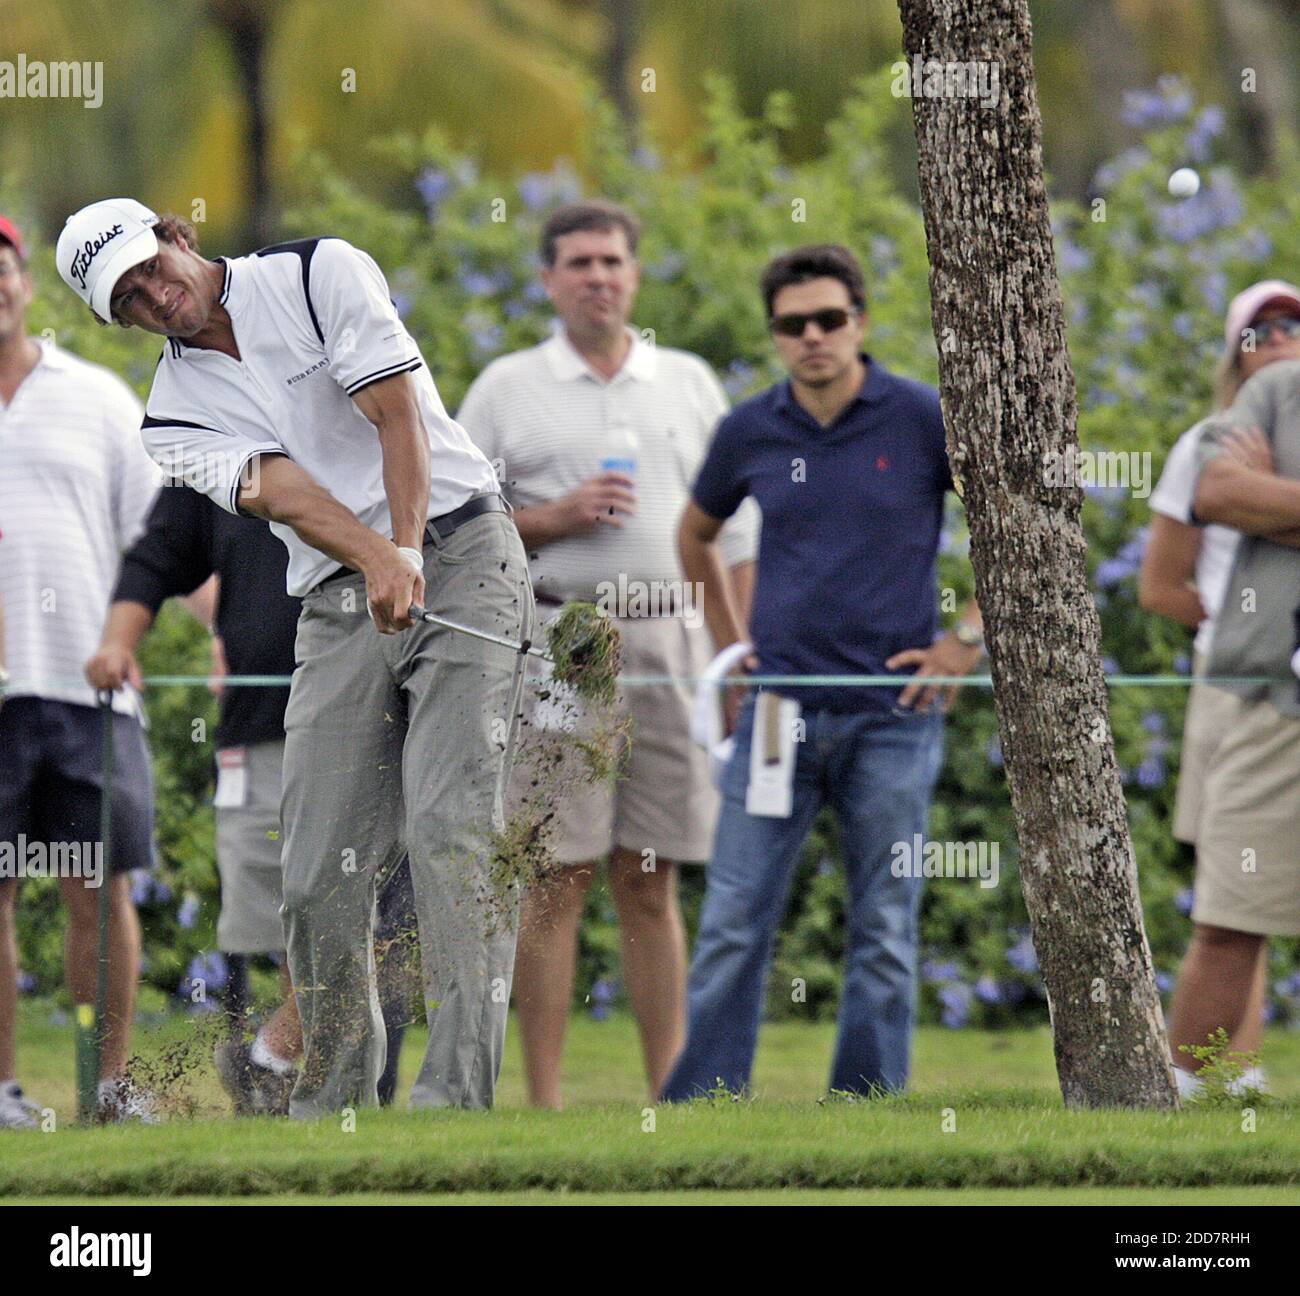 NO FILM, NO VIDEO, NO TV, NO DOCUMENTARY - Adam Scott hits out of the rough on the 17th hole during the continuation of the third round of the 2008 World Golf Championship-CA at the Doral Golf Resort & Spa in Miami, FL, USA on March 23, 2008.Photo by John VanBeekum/Miami Herald/MCT/Cameleon/ABACAPRESS.COM Stock Photo